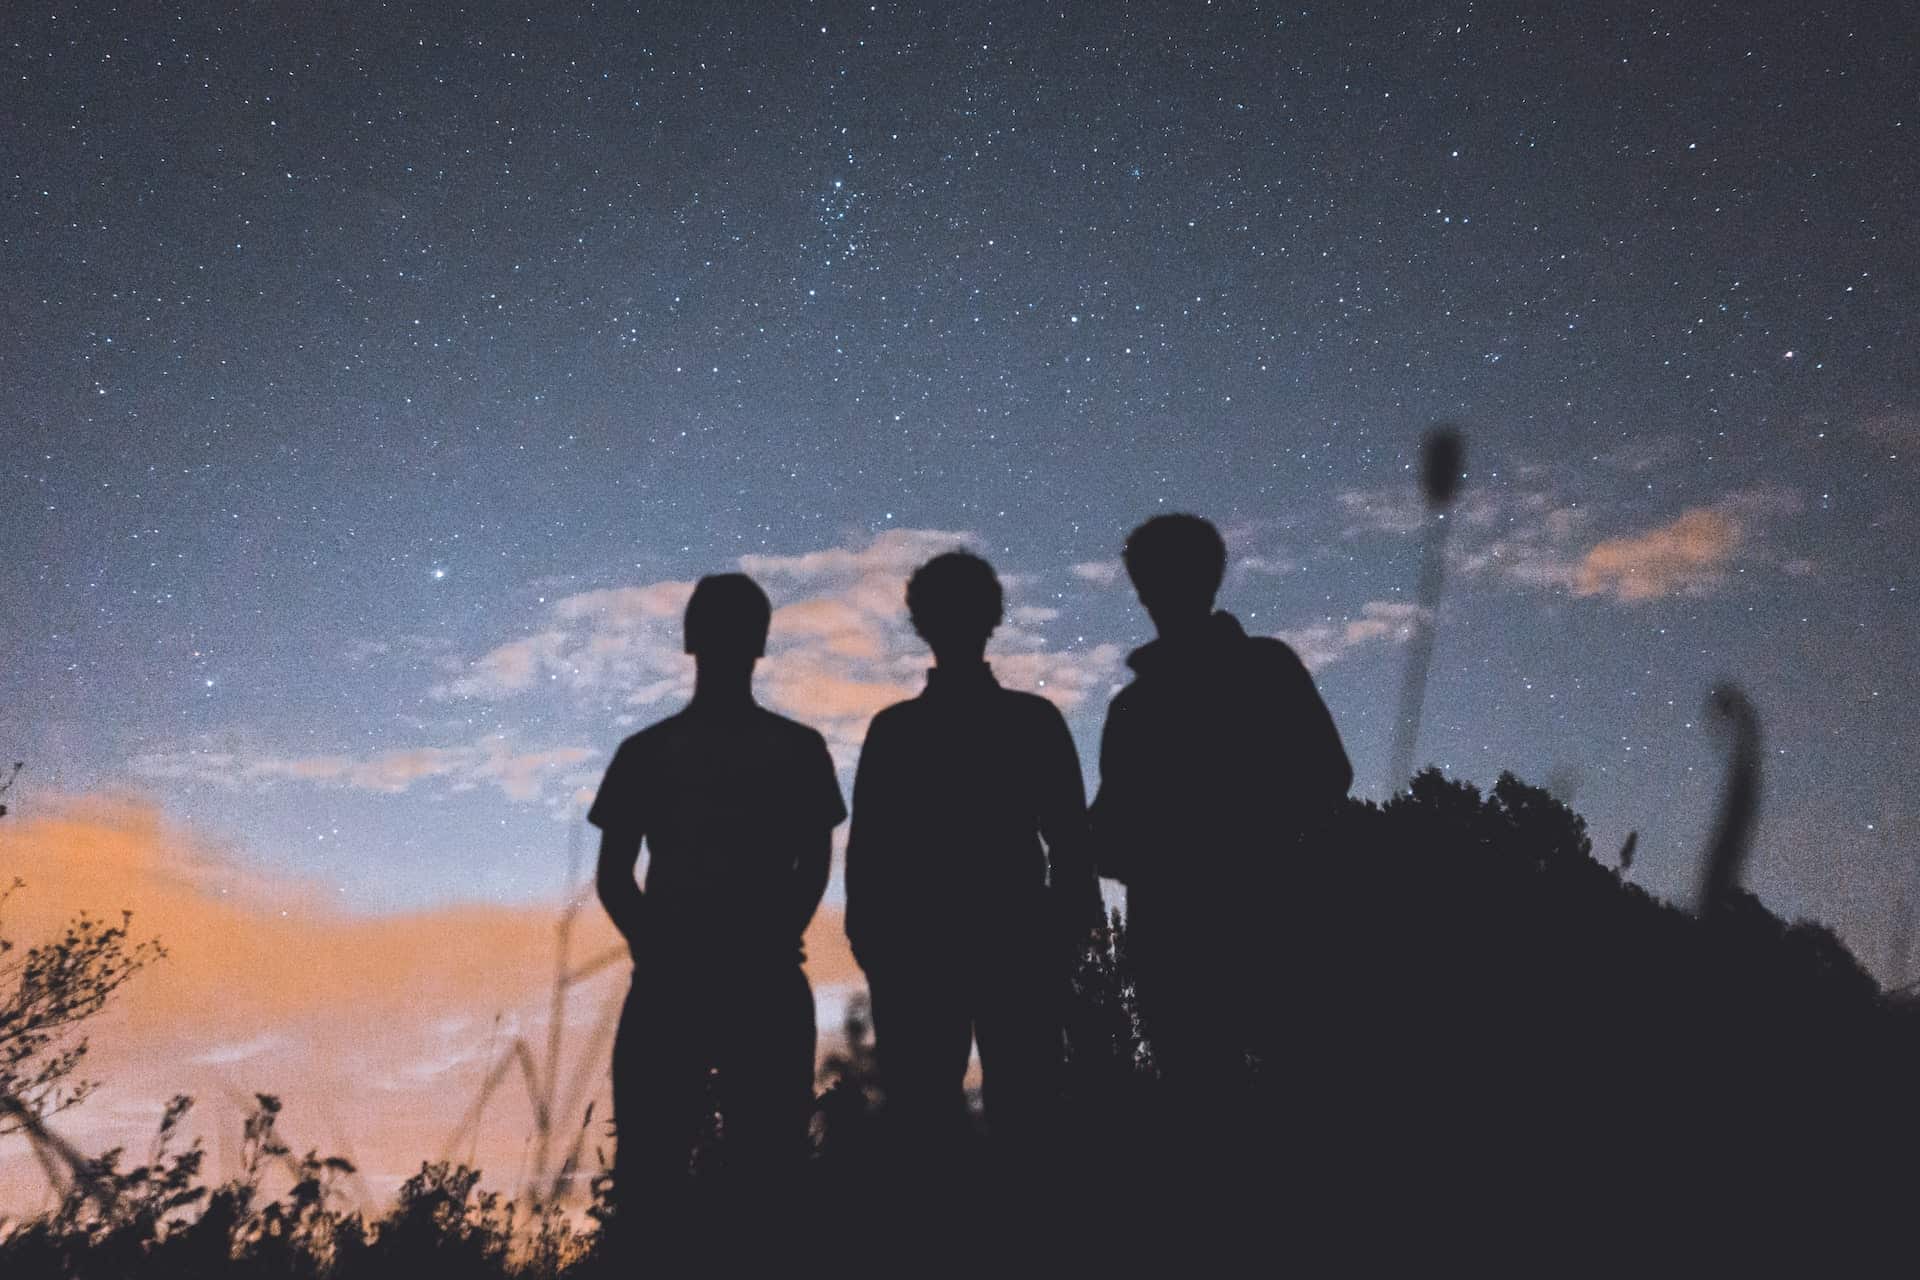 Silhouettes of three men standing under a starry sky.